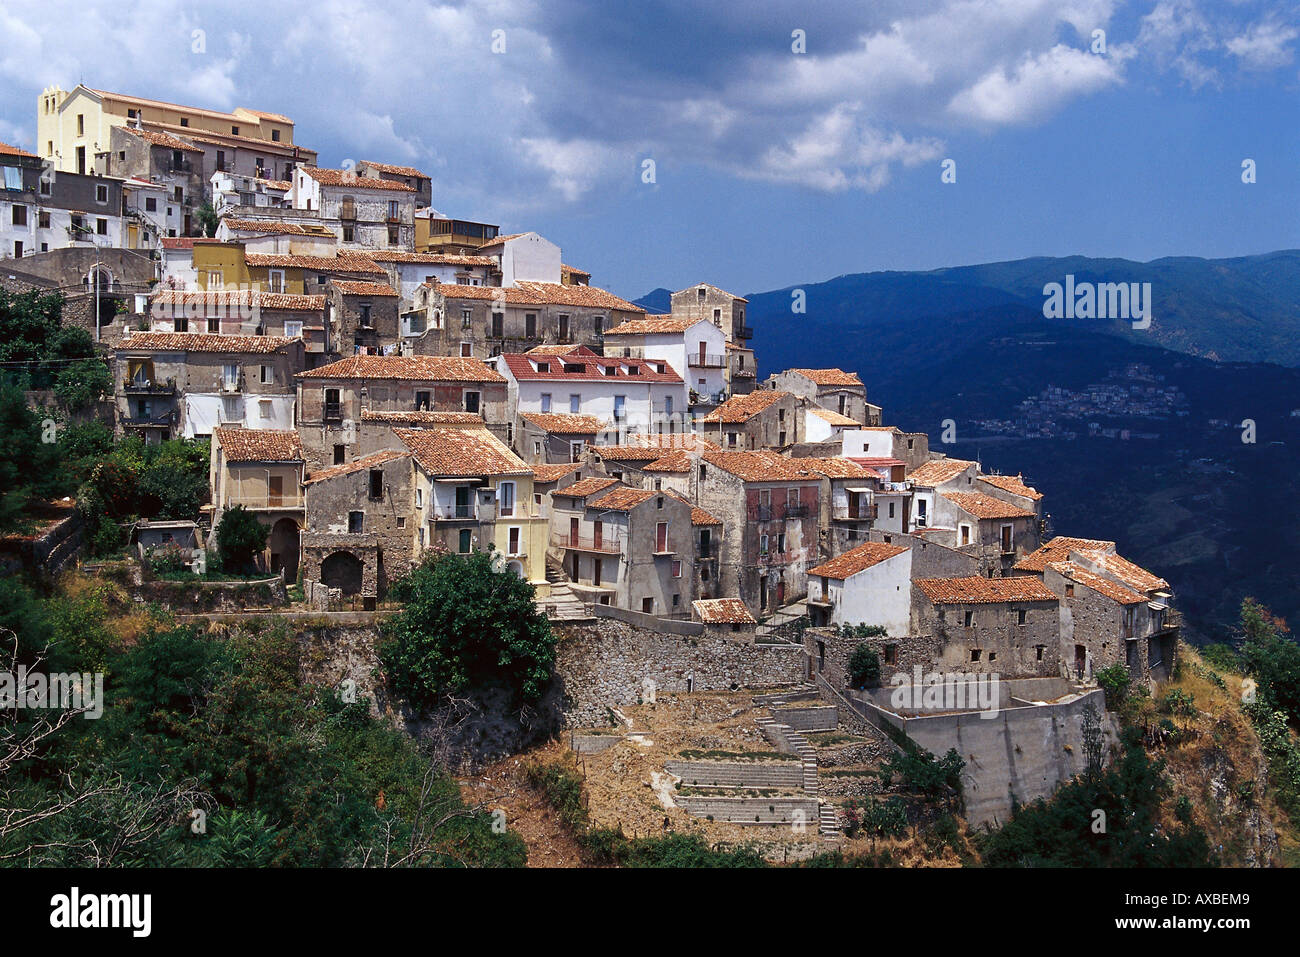 The village Sellia under clouded sky, Calabria, Italy, Europe Stock Photo